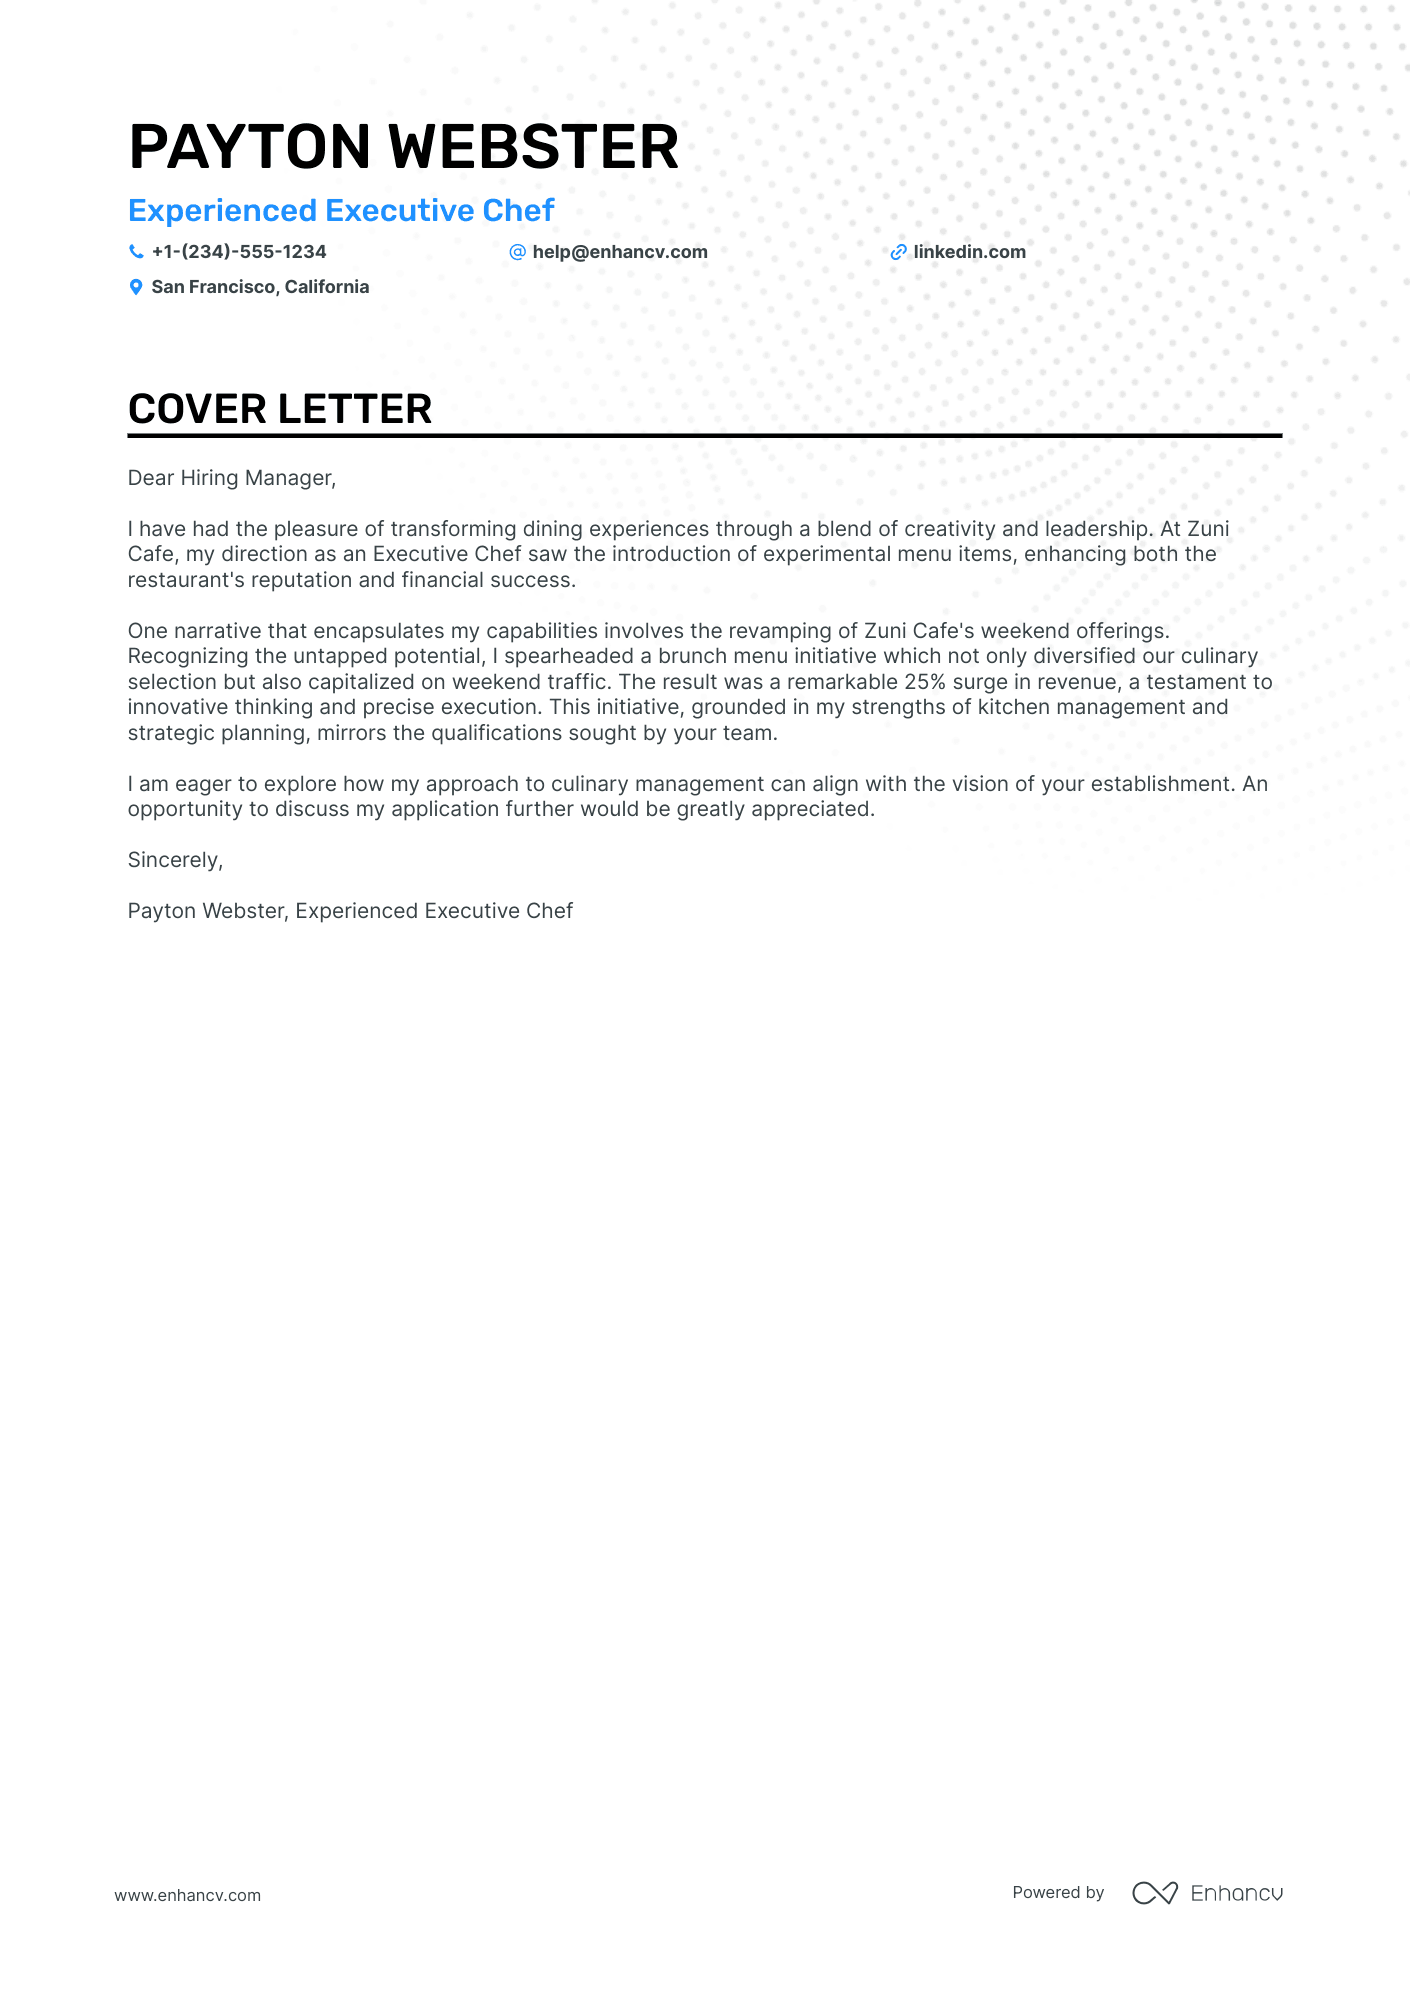 Executive Chef cover letter